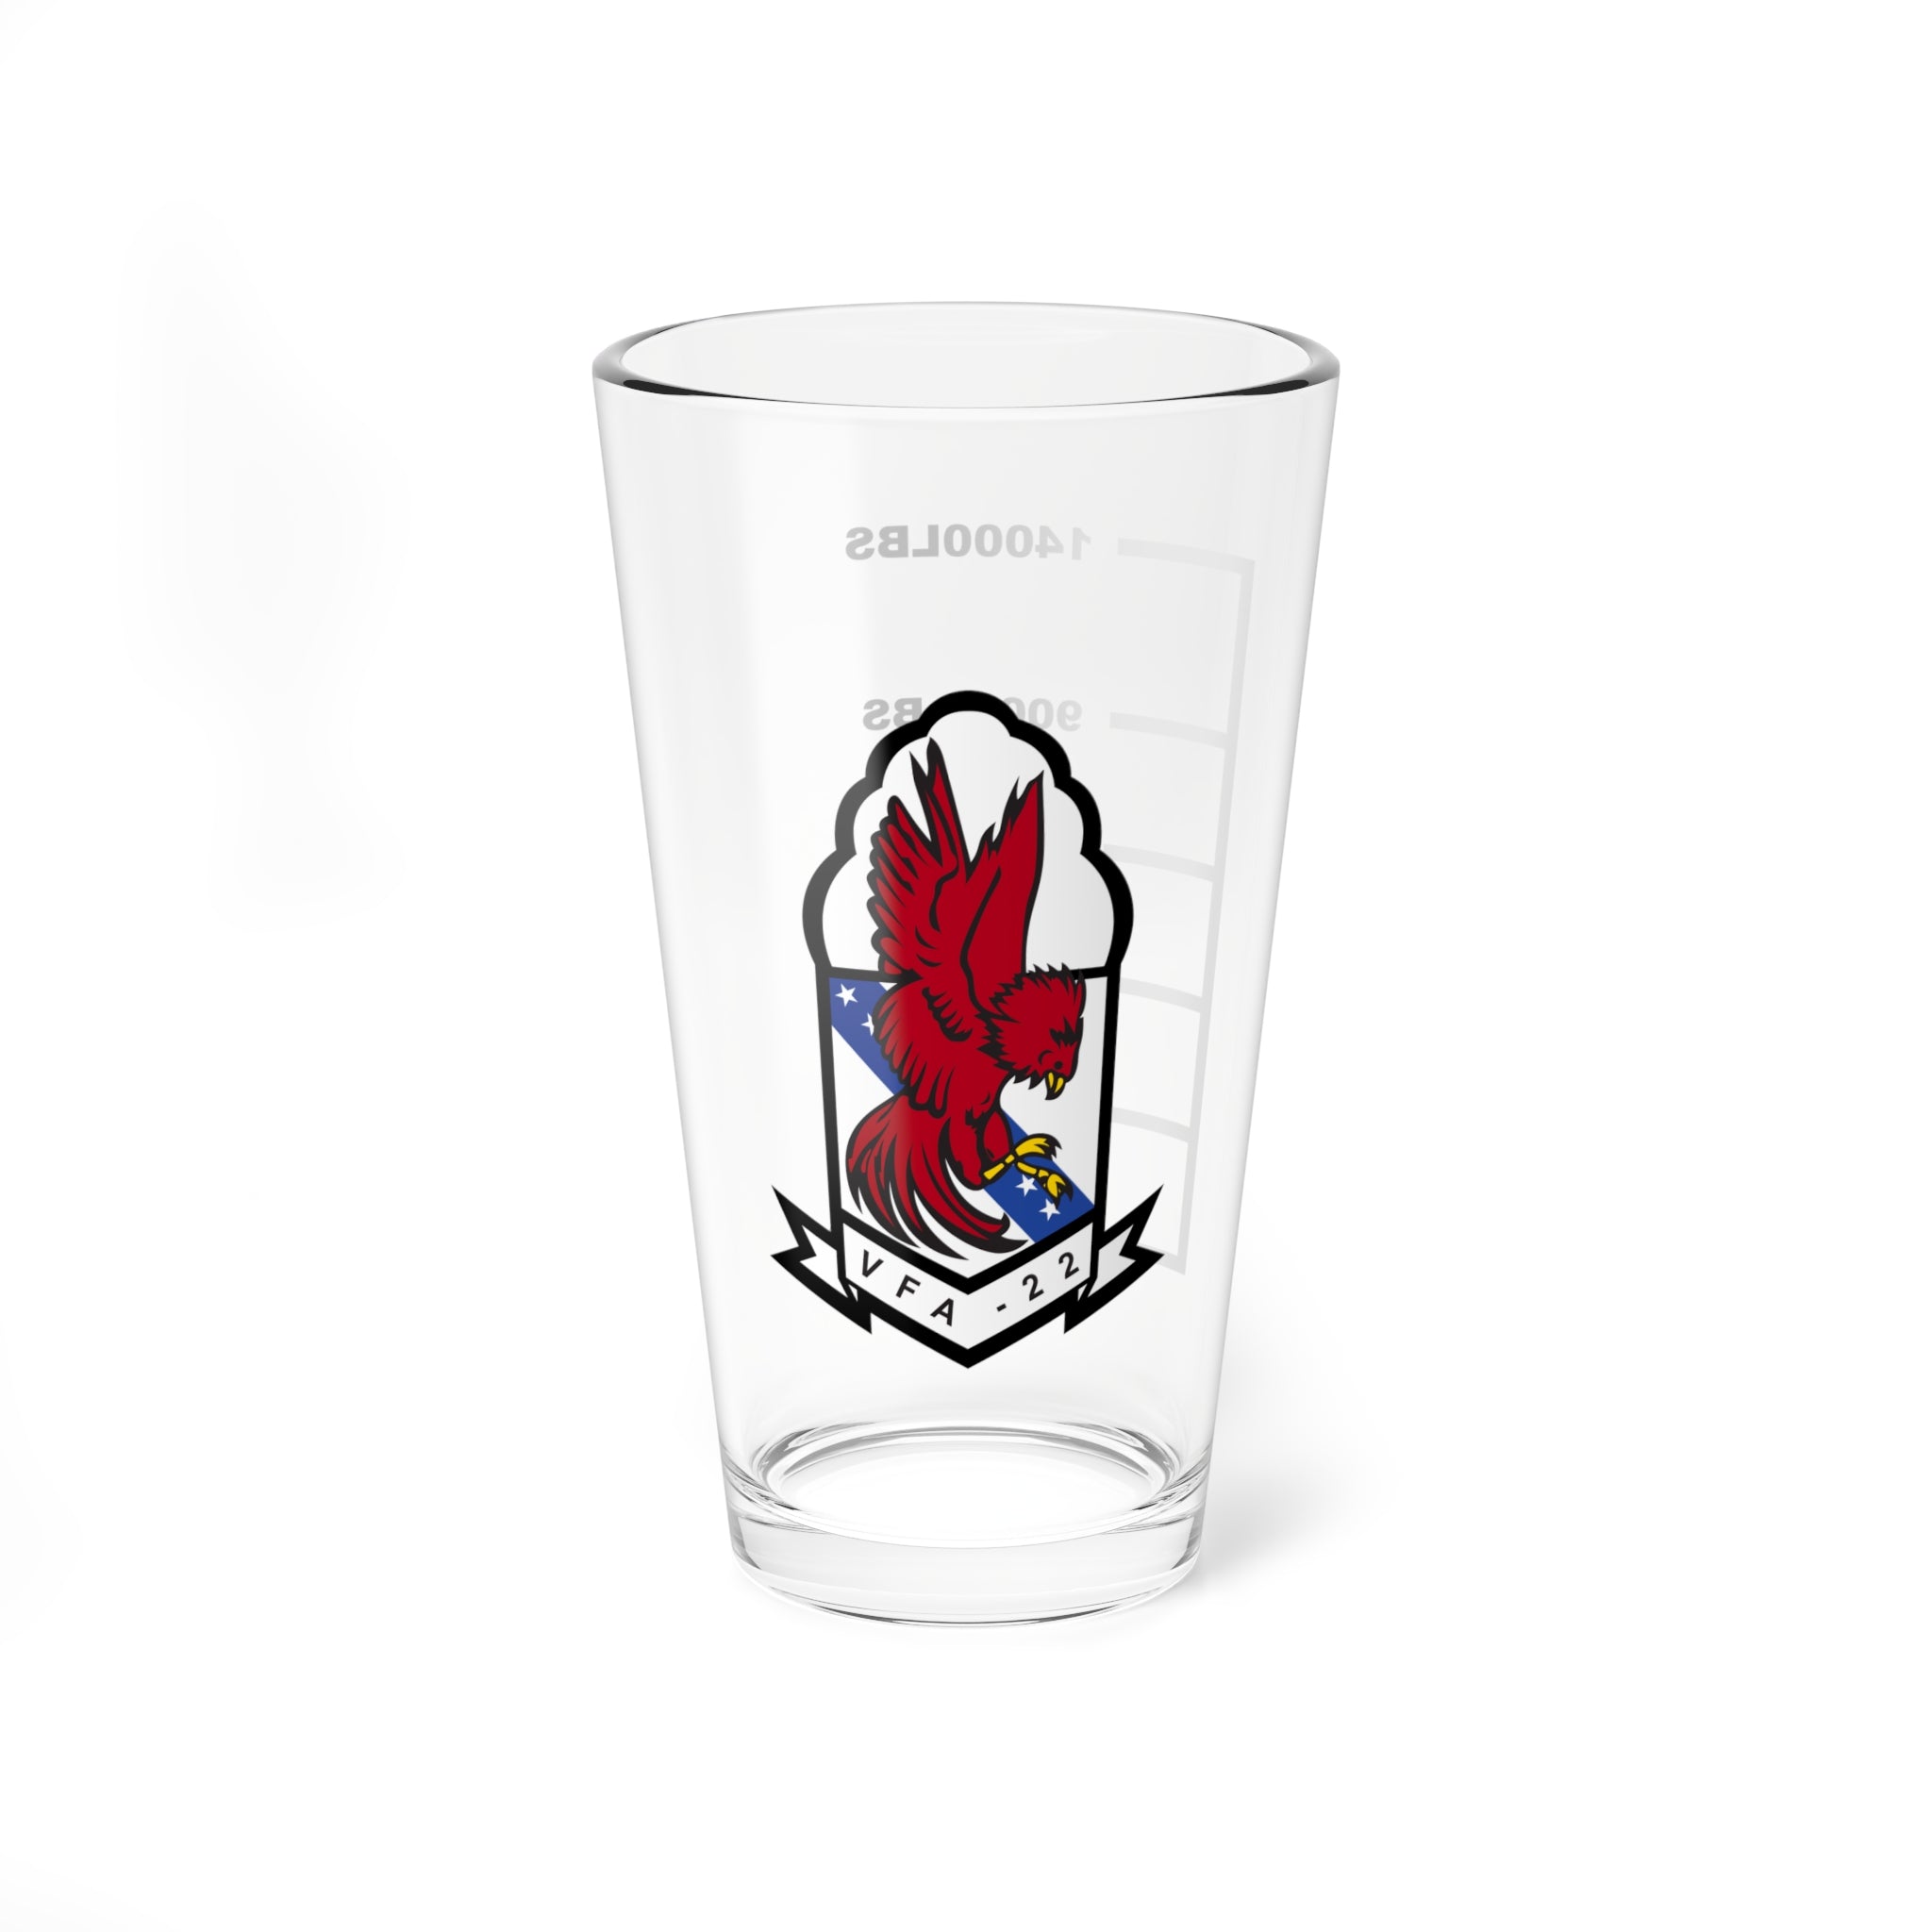 VFA-22 "Fighting Redcocks" AD2 Pint Glass, Navy Strike Fighter Squadron flying the F/A-18 Hornet